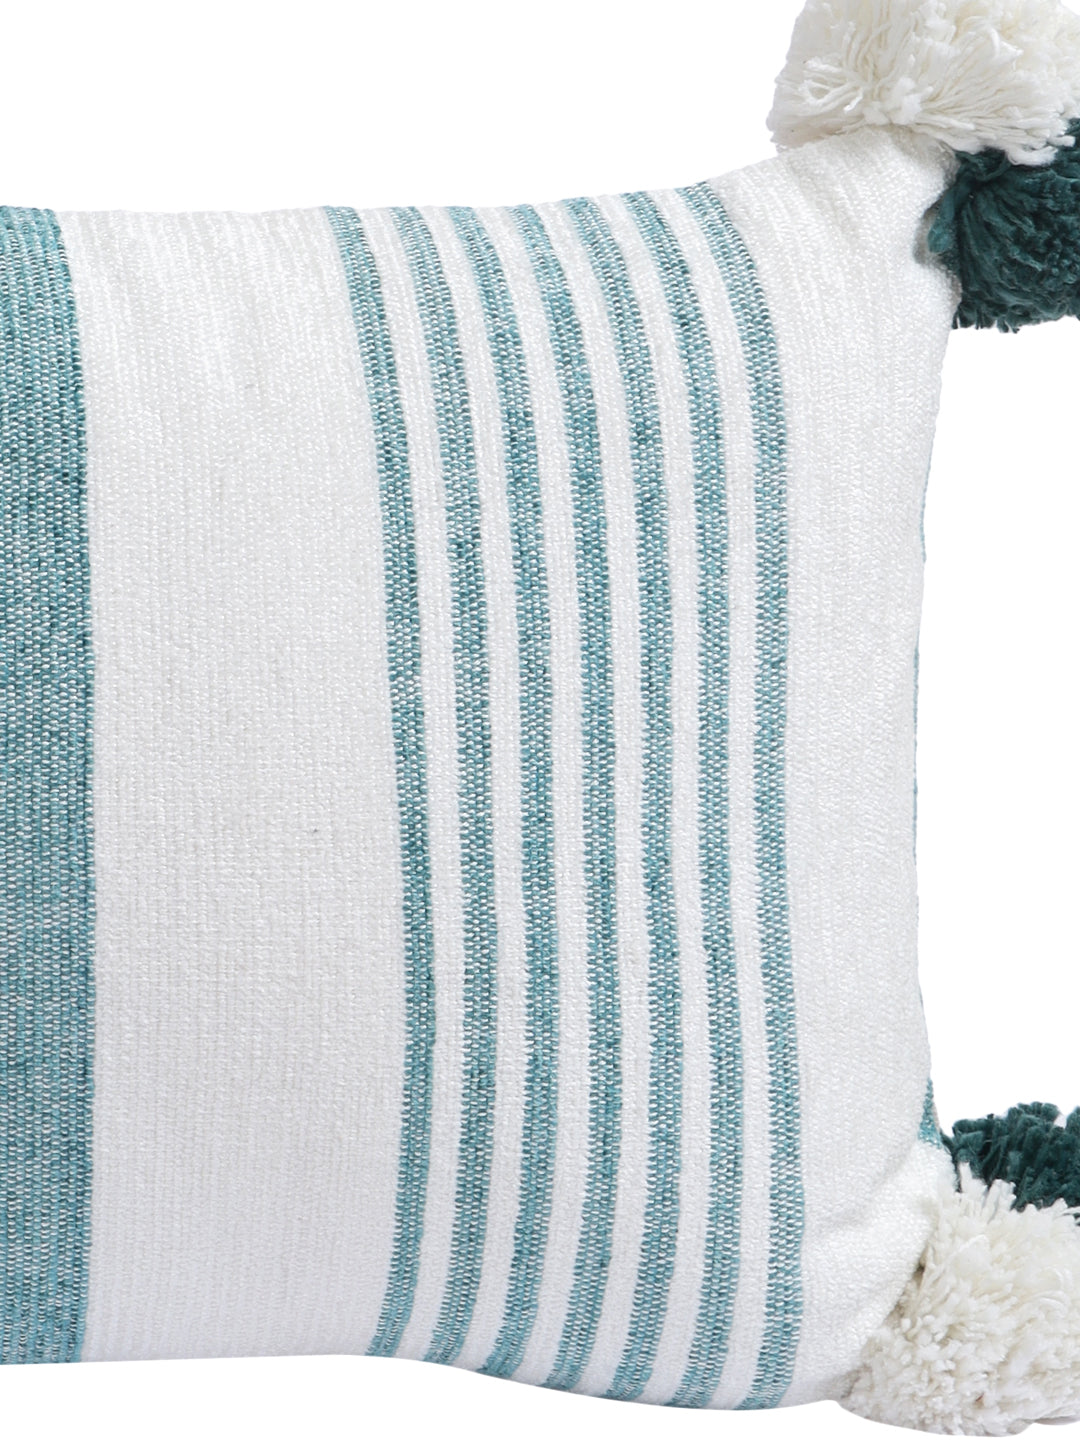 Decorative White and Teal Striped Set of 2 Cushion Cover